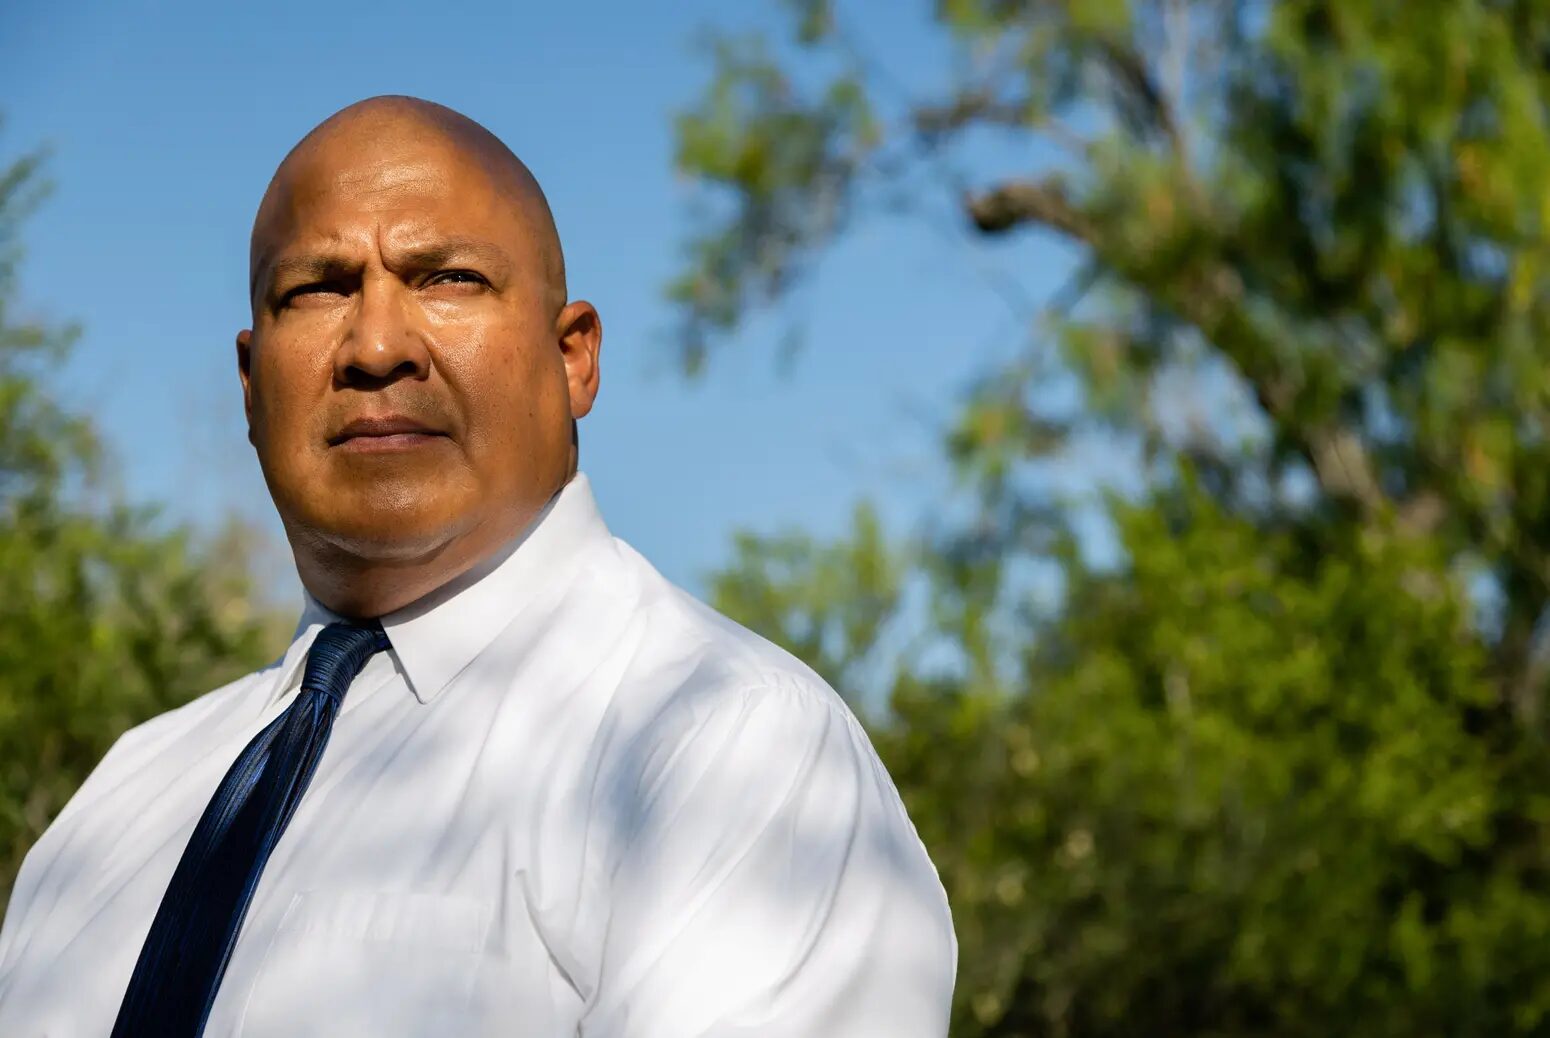 Uvalde indictment: Bald white man in white business shirt and dark tie stands staring seriously into camera under blue sky with green trees in the background.